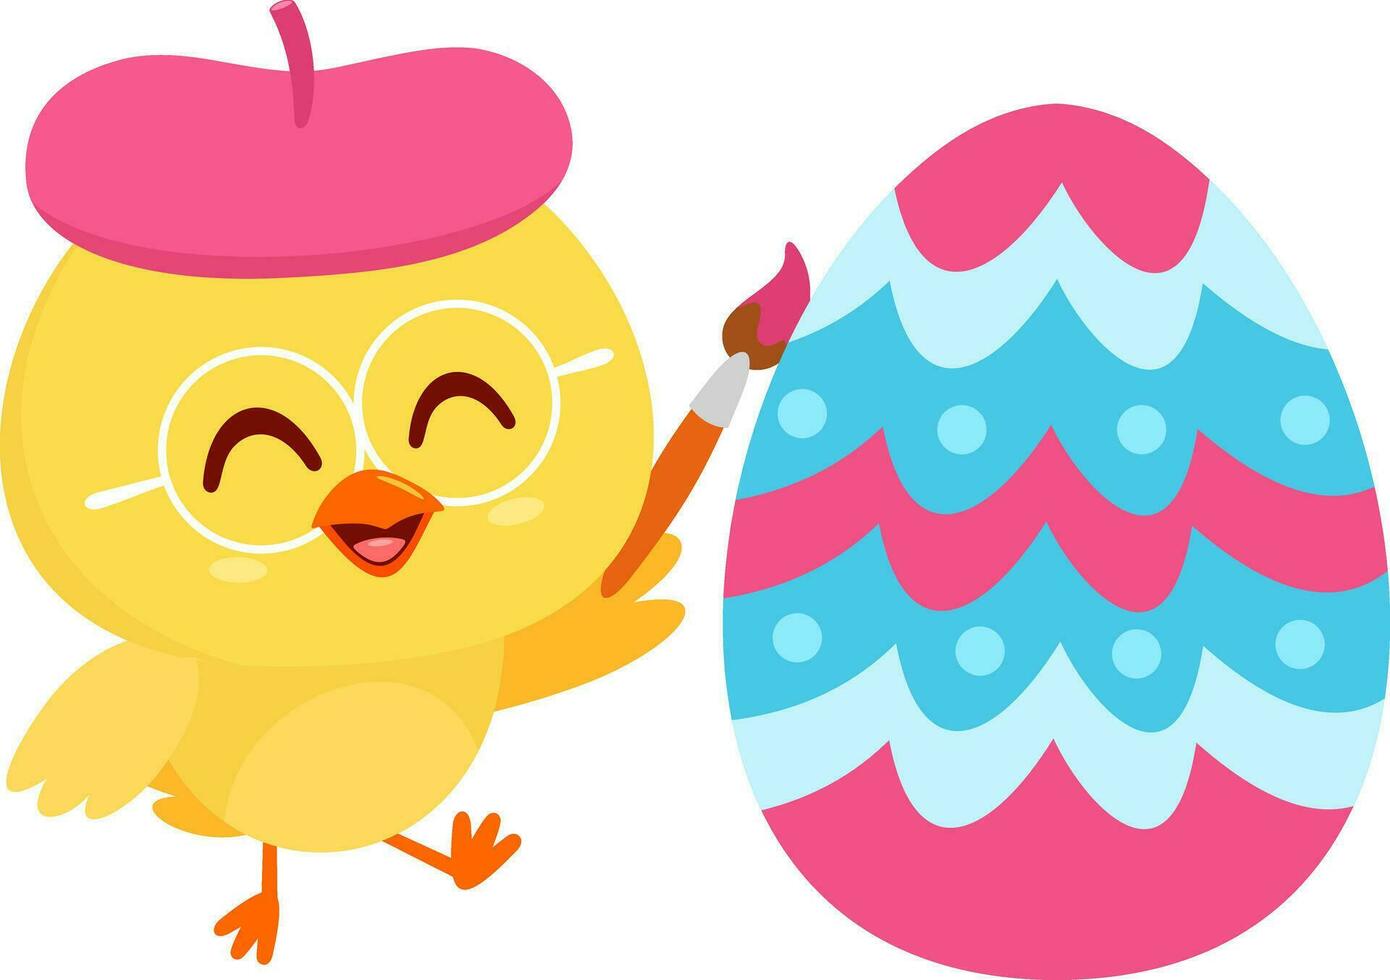 Cute Yellow Chick Cartoon Character Painting Colorful Easter Egg. Vector Illustration Flat Design